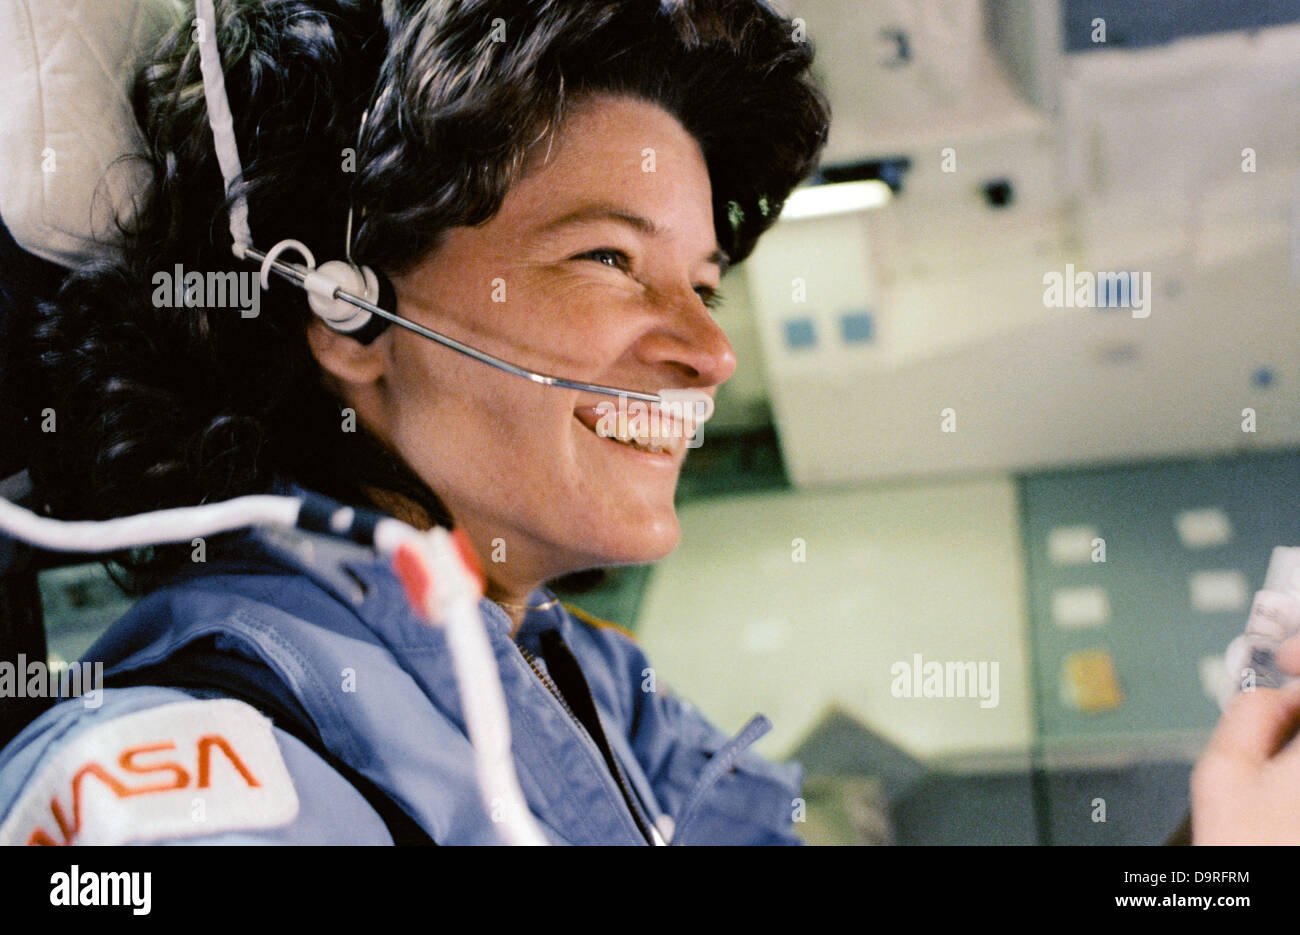 Sally Ride sits in the aft flight deck of the space shuttle Challenger, Mission STS-7 on her June 18, 1983 mission Stock Photo